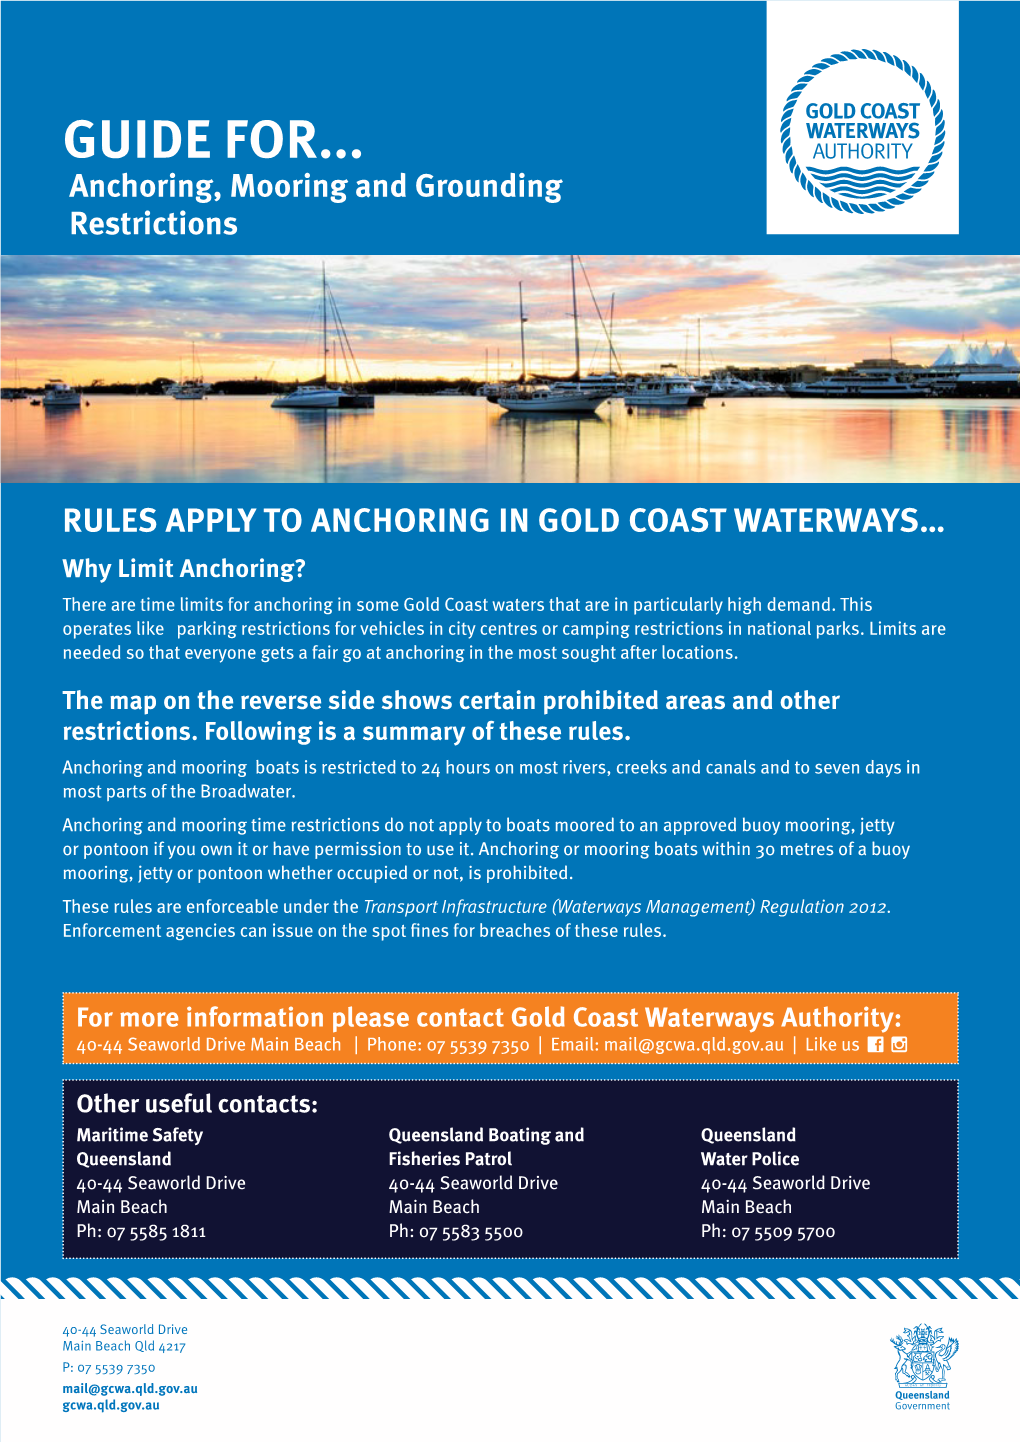 GUIDE FOR... Anchoring, Mooring and Grounding Restrictions